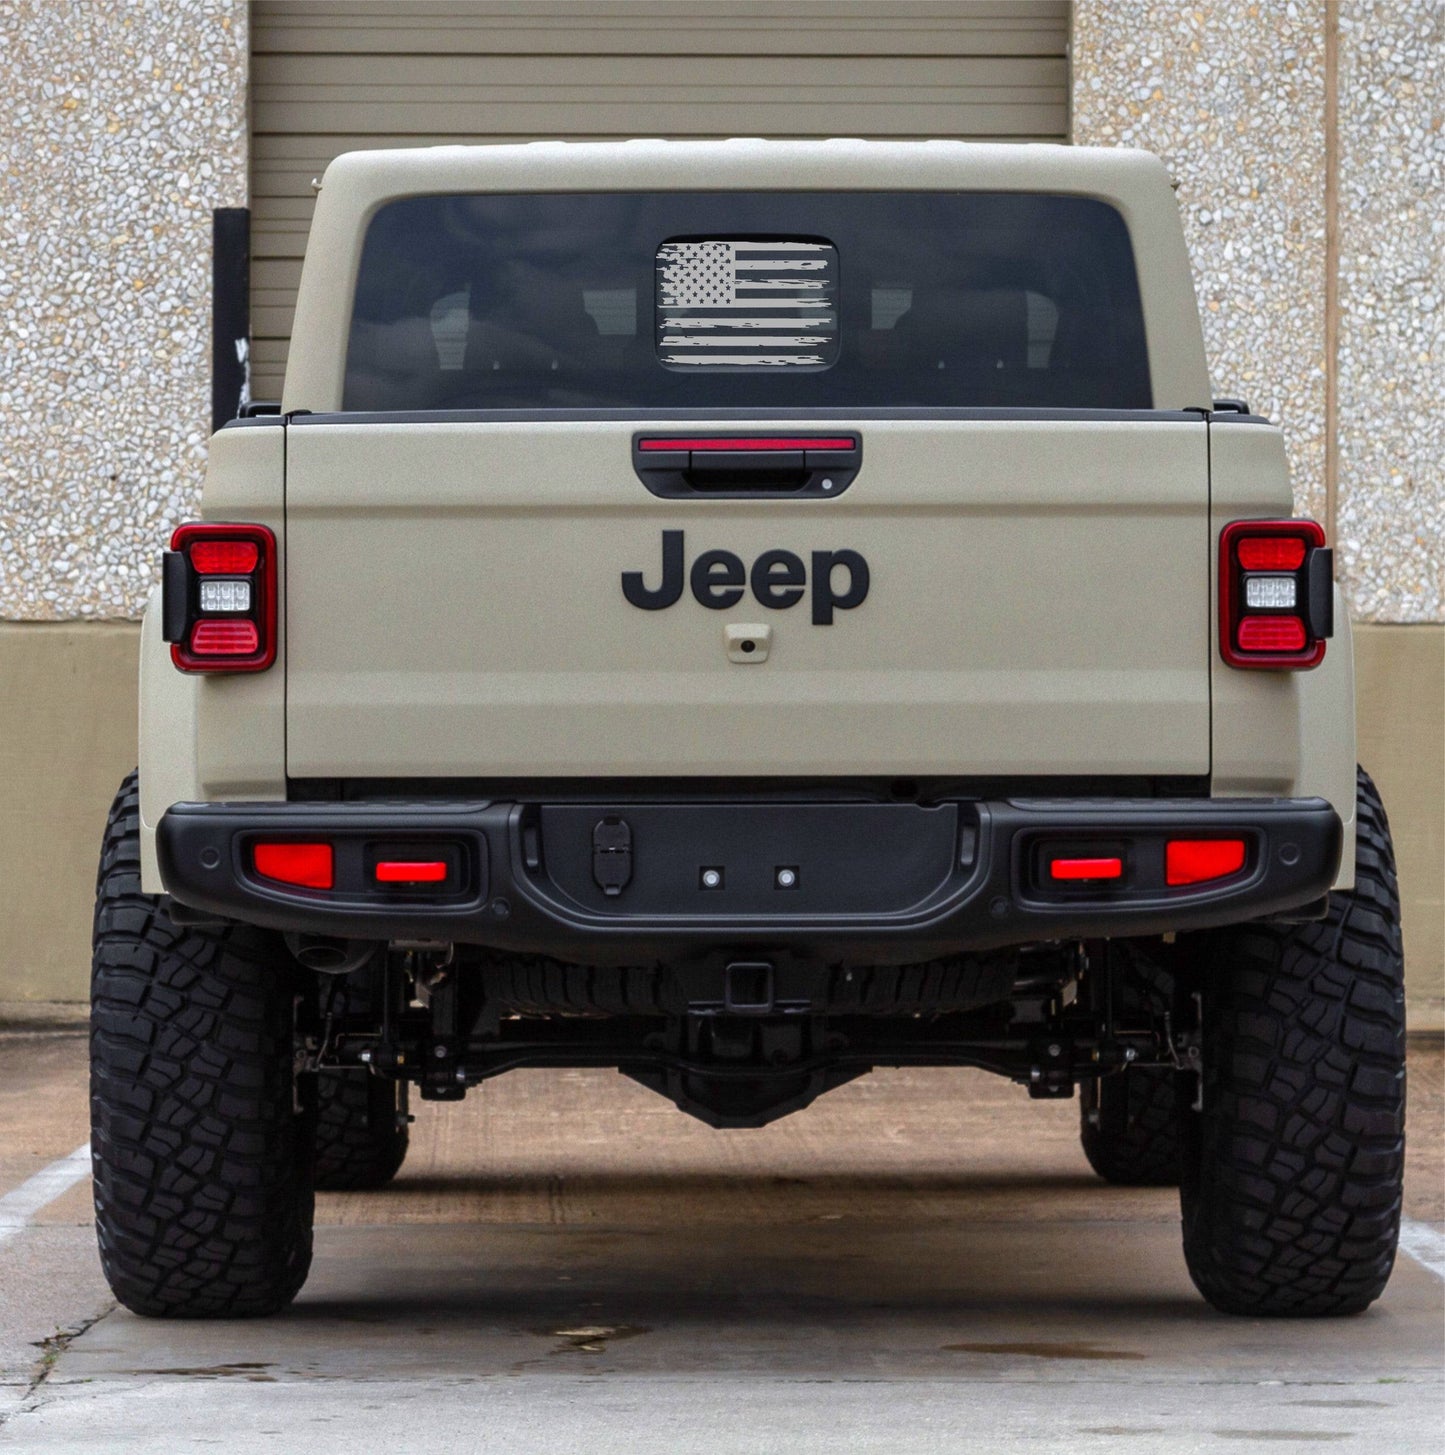 Distressed American Flag Vinyl Decal for Jeep Gladiator's Small Back Rear Window